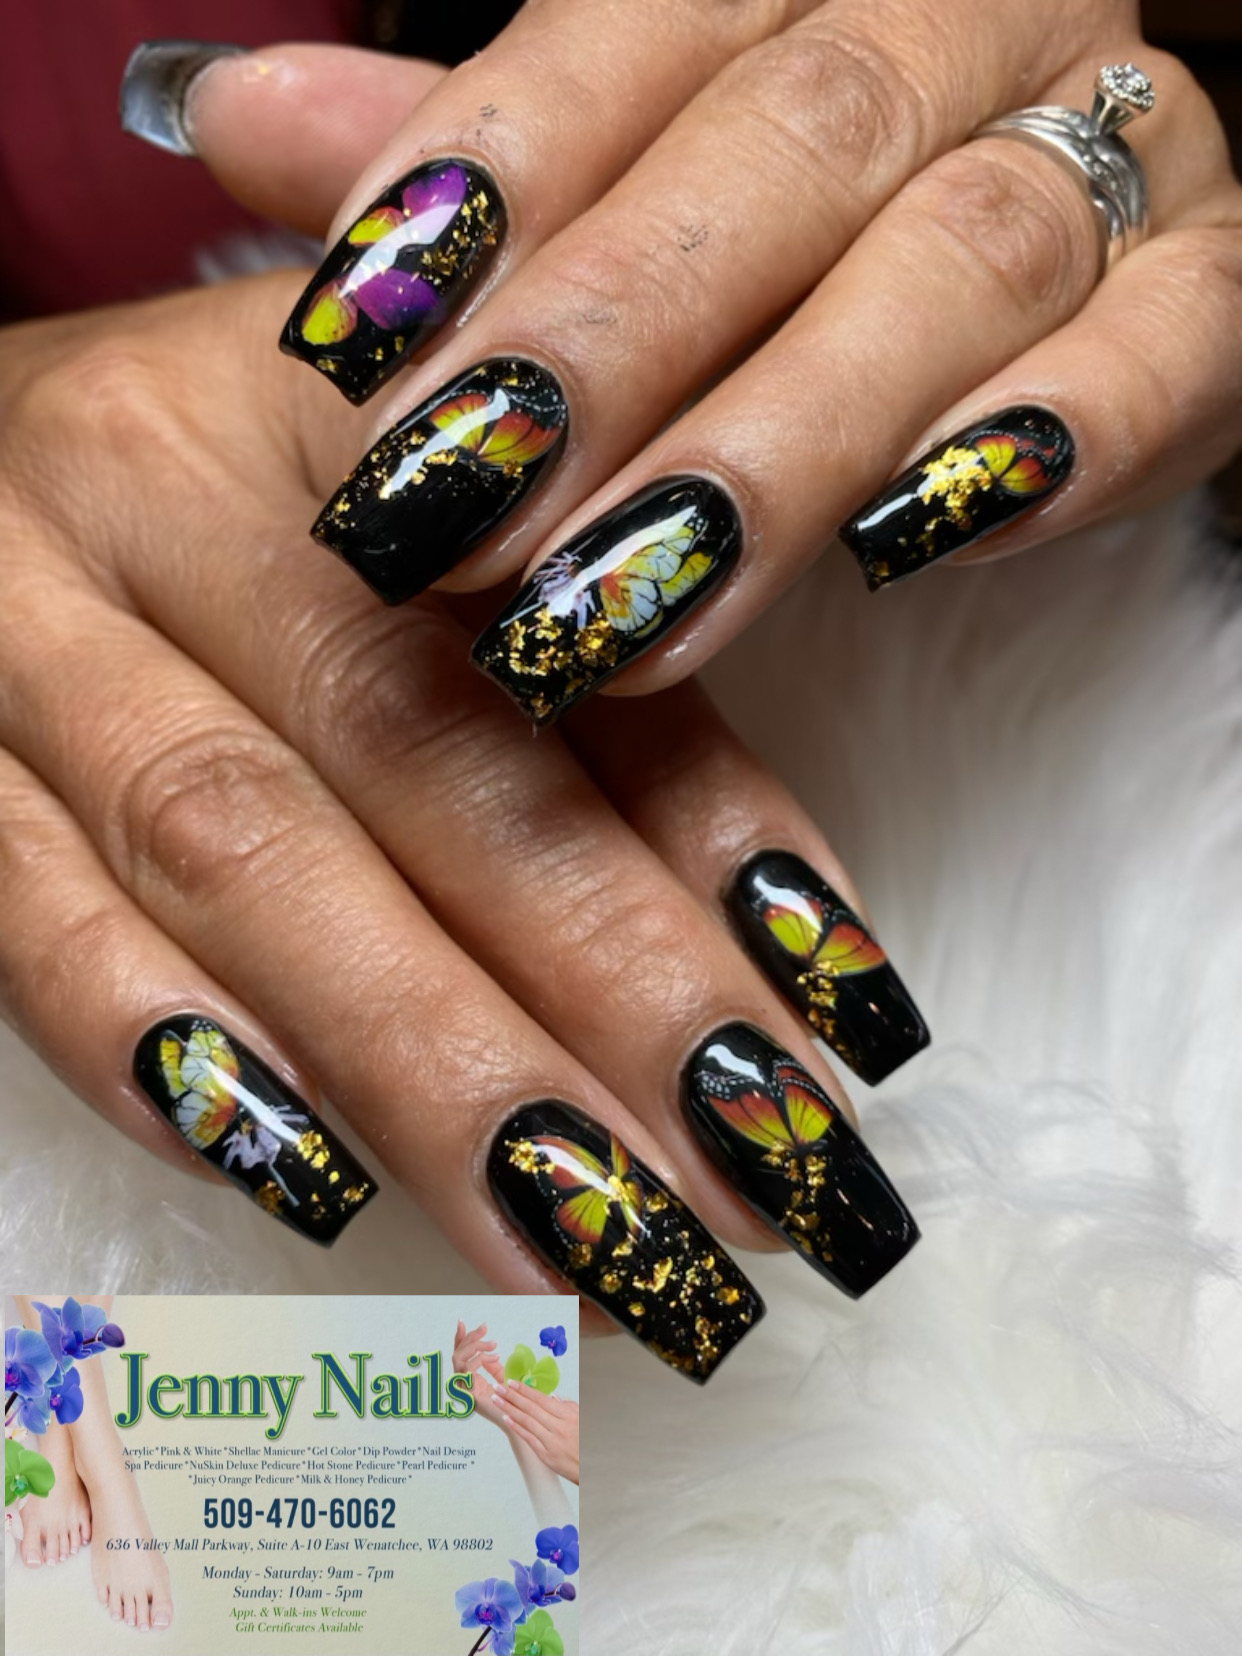 Jenny Nails 636 Valley Mall Pkwy Suite A-10, East Wenatchee Washington 98802